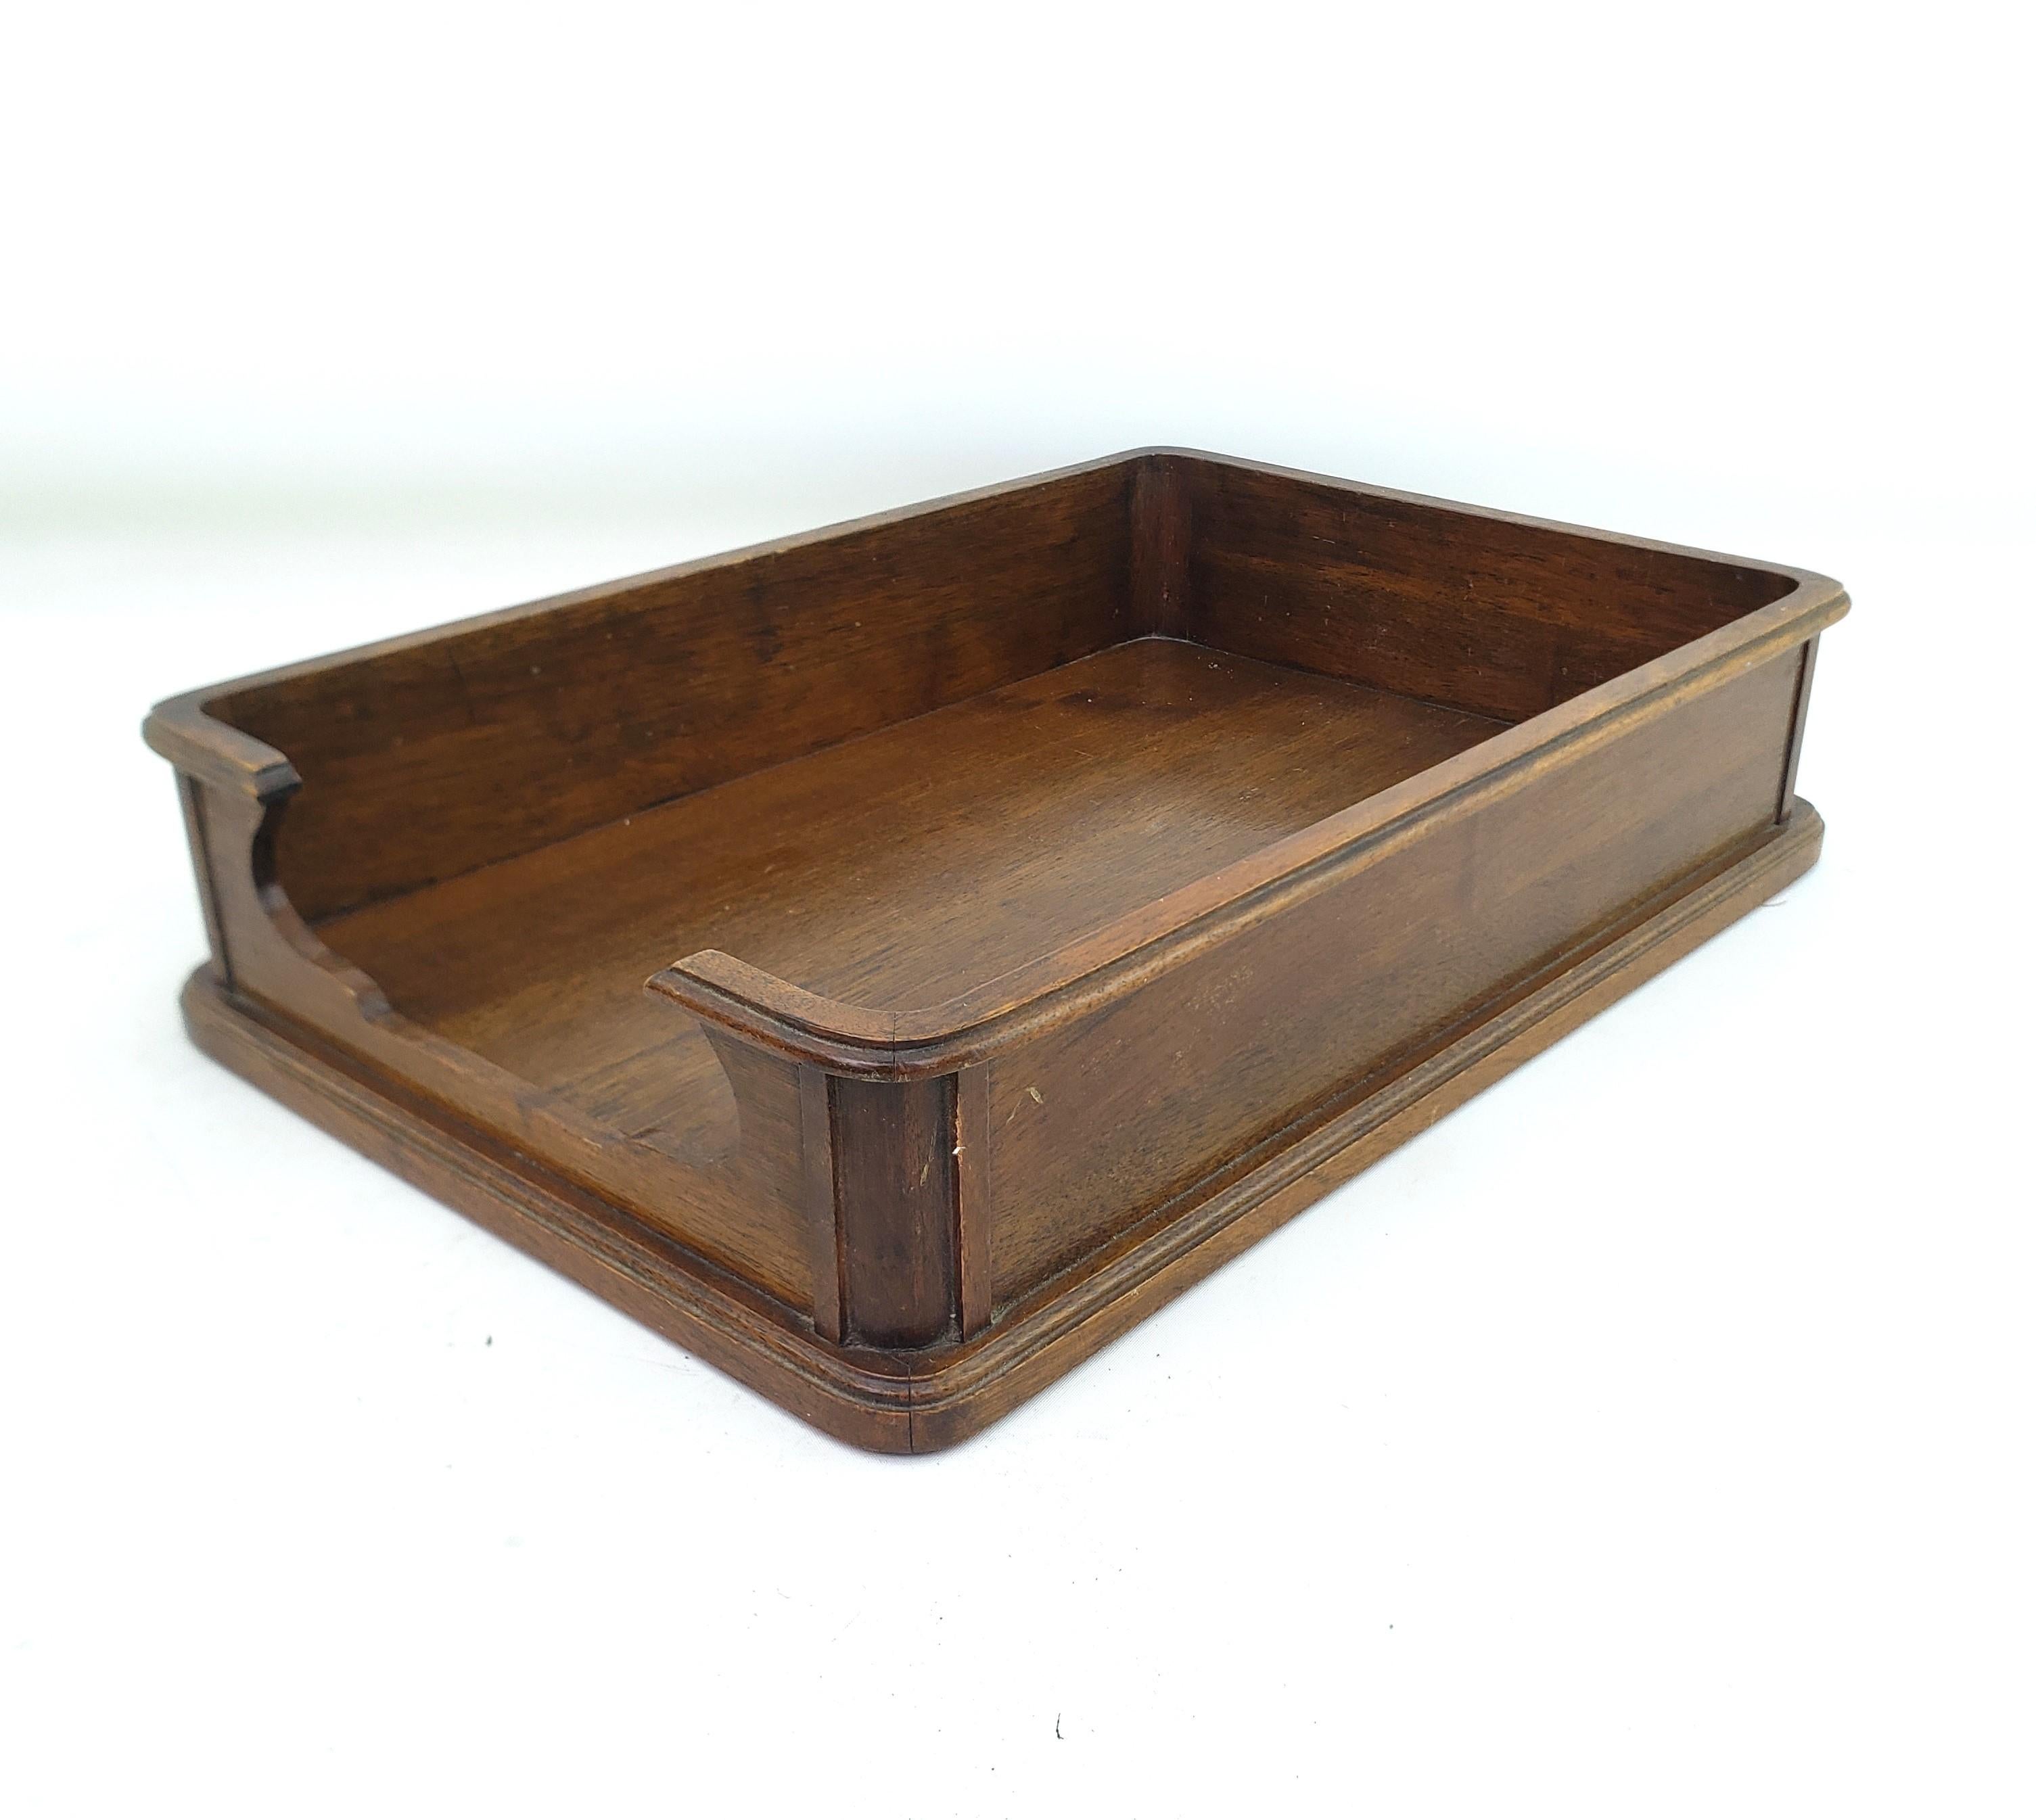 English Antique Walnut Art Deco Executive Desk Tray or Document & Letter Holder For Sale